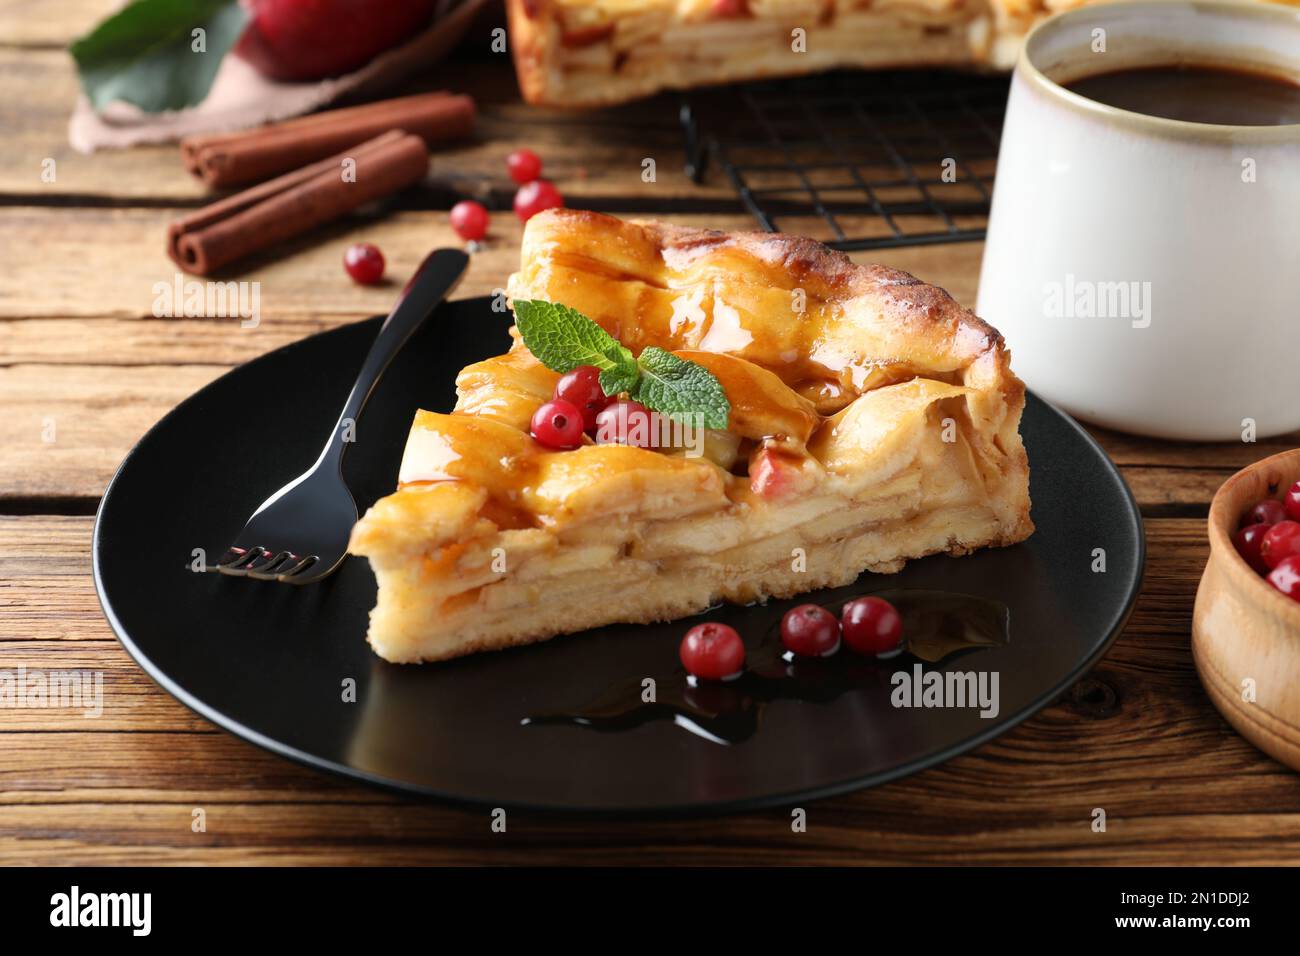 Slice of traditional apple pie with berries served on wooden table, closeup Stock Photo